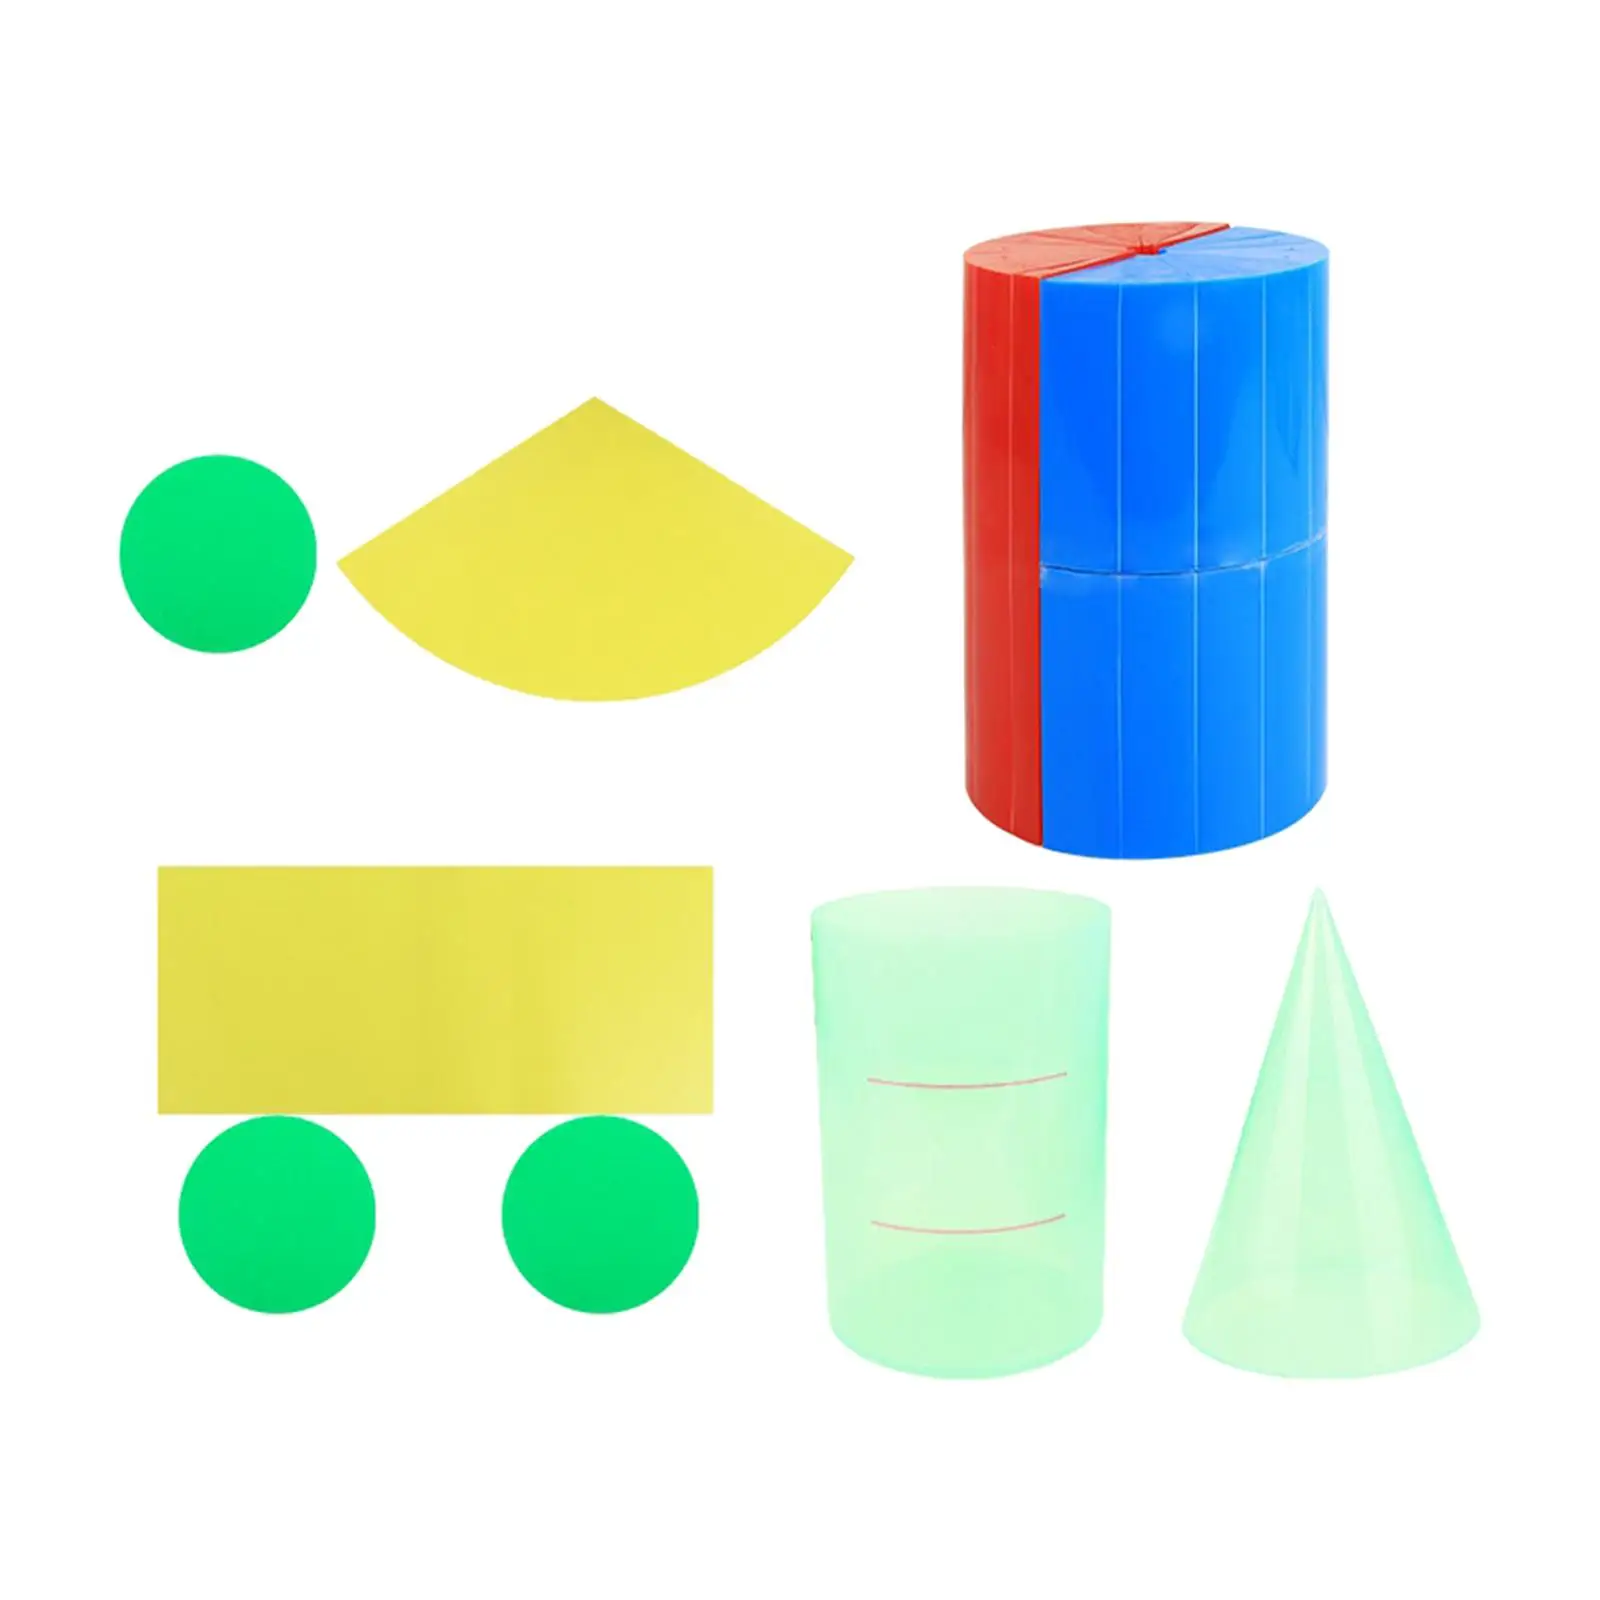 3D Shapes Geometric Educational Toy Learning Material Mathematics Teaching Aids Geometric Shapes for Children Boys Holiday Gifts